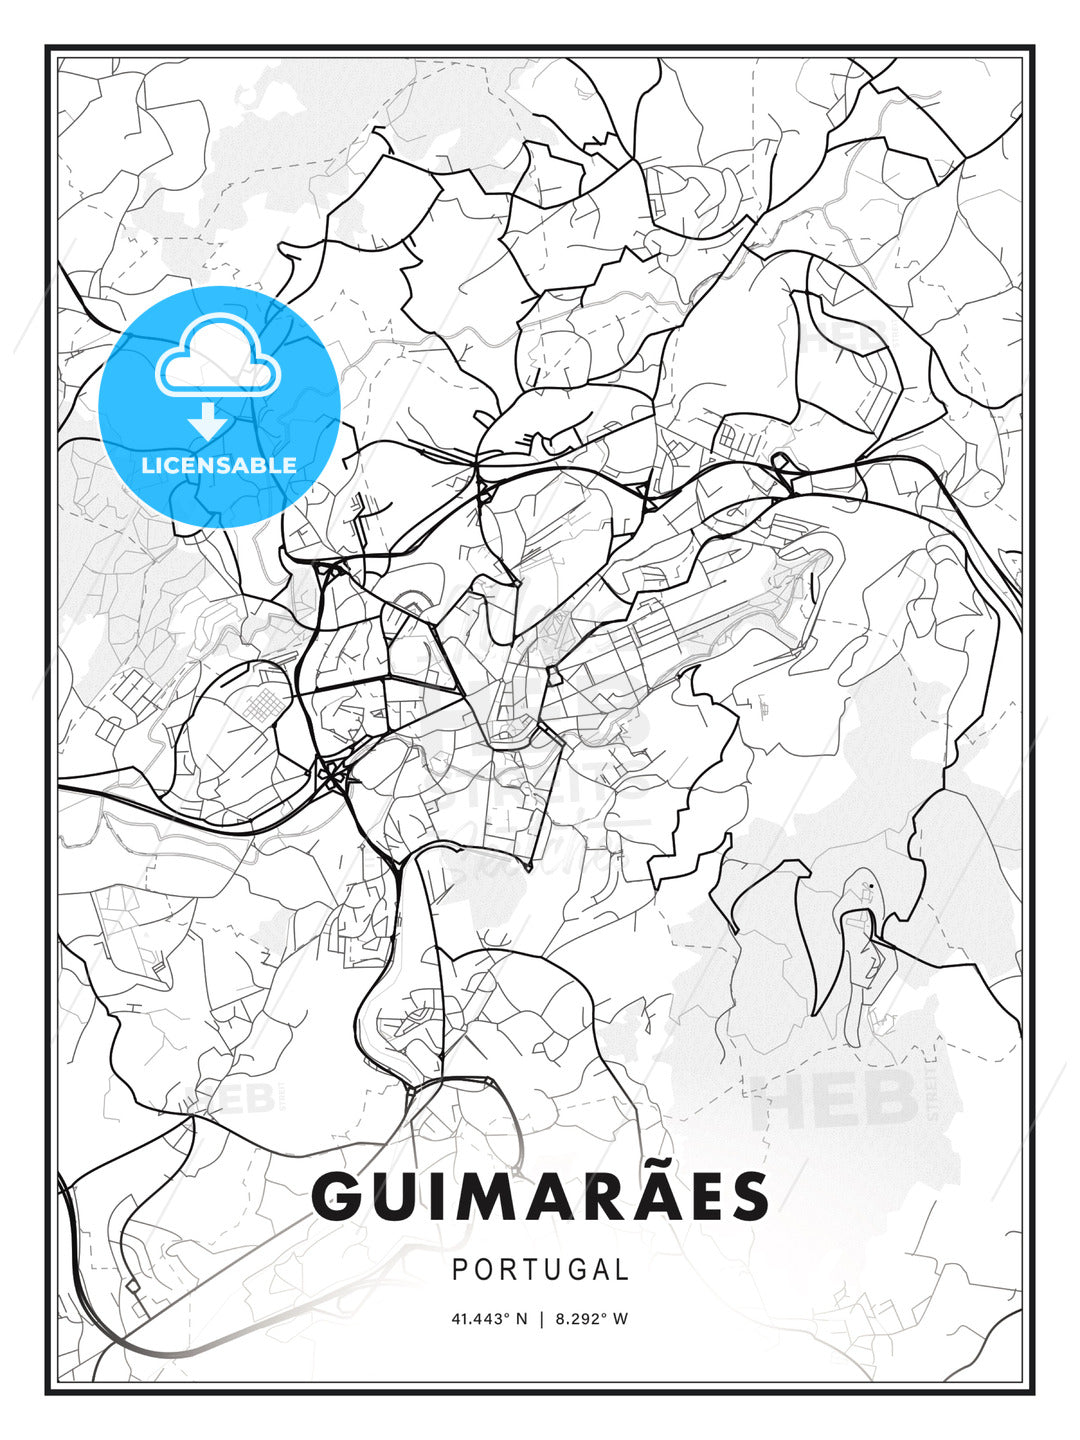 Guimarães, Portugal, Modern Print Template in Various Formats - HEBSTREITS Sketches